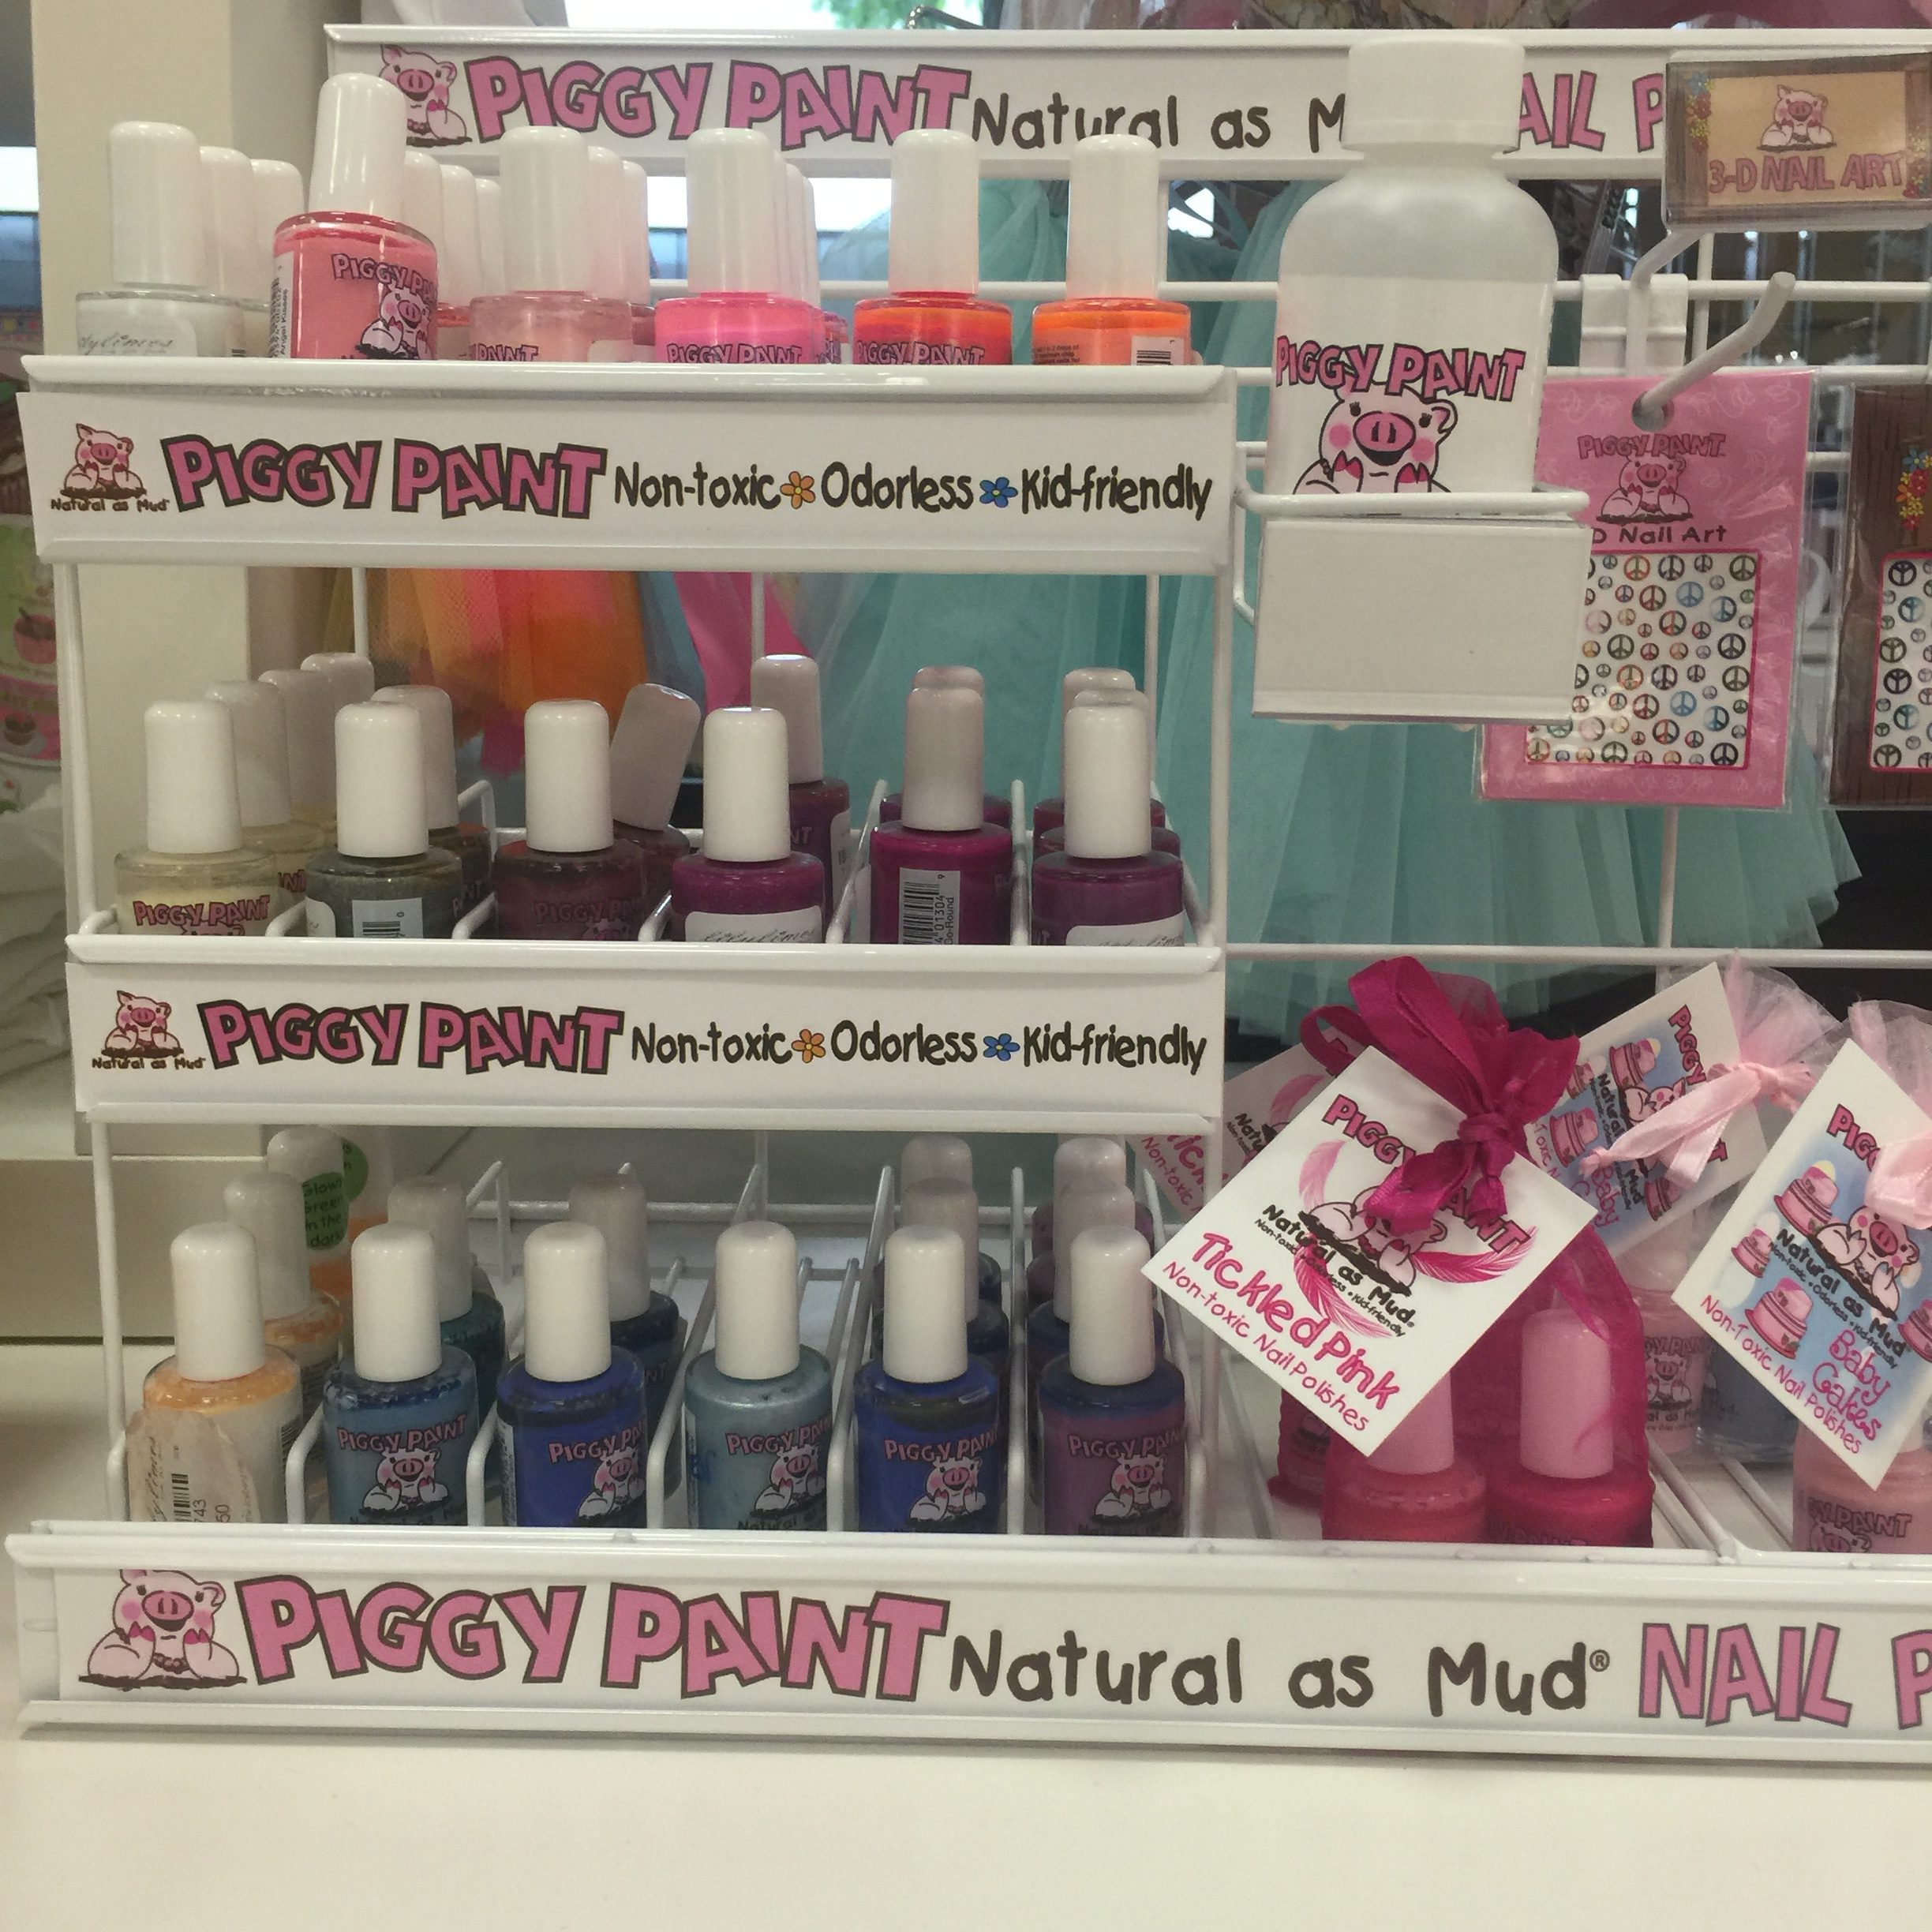 If you're looking for a kiddo friendly nail polish, check out Piggy Paint.